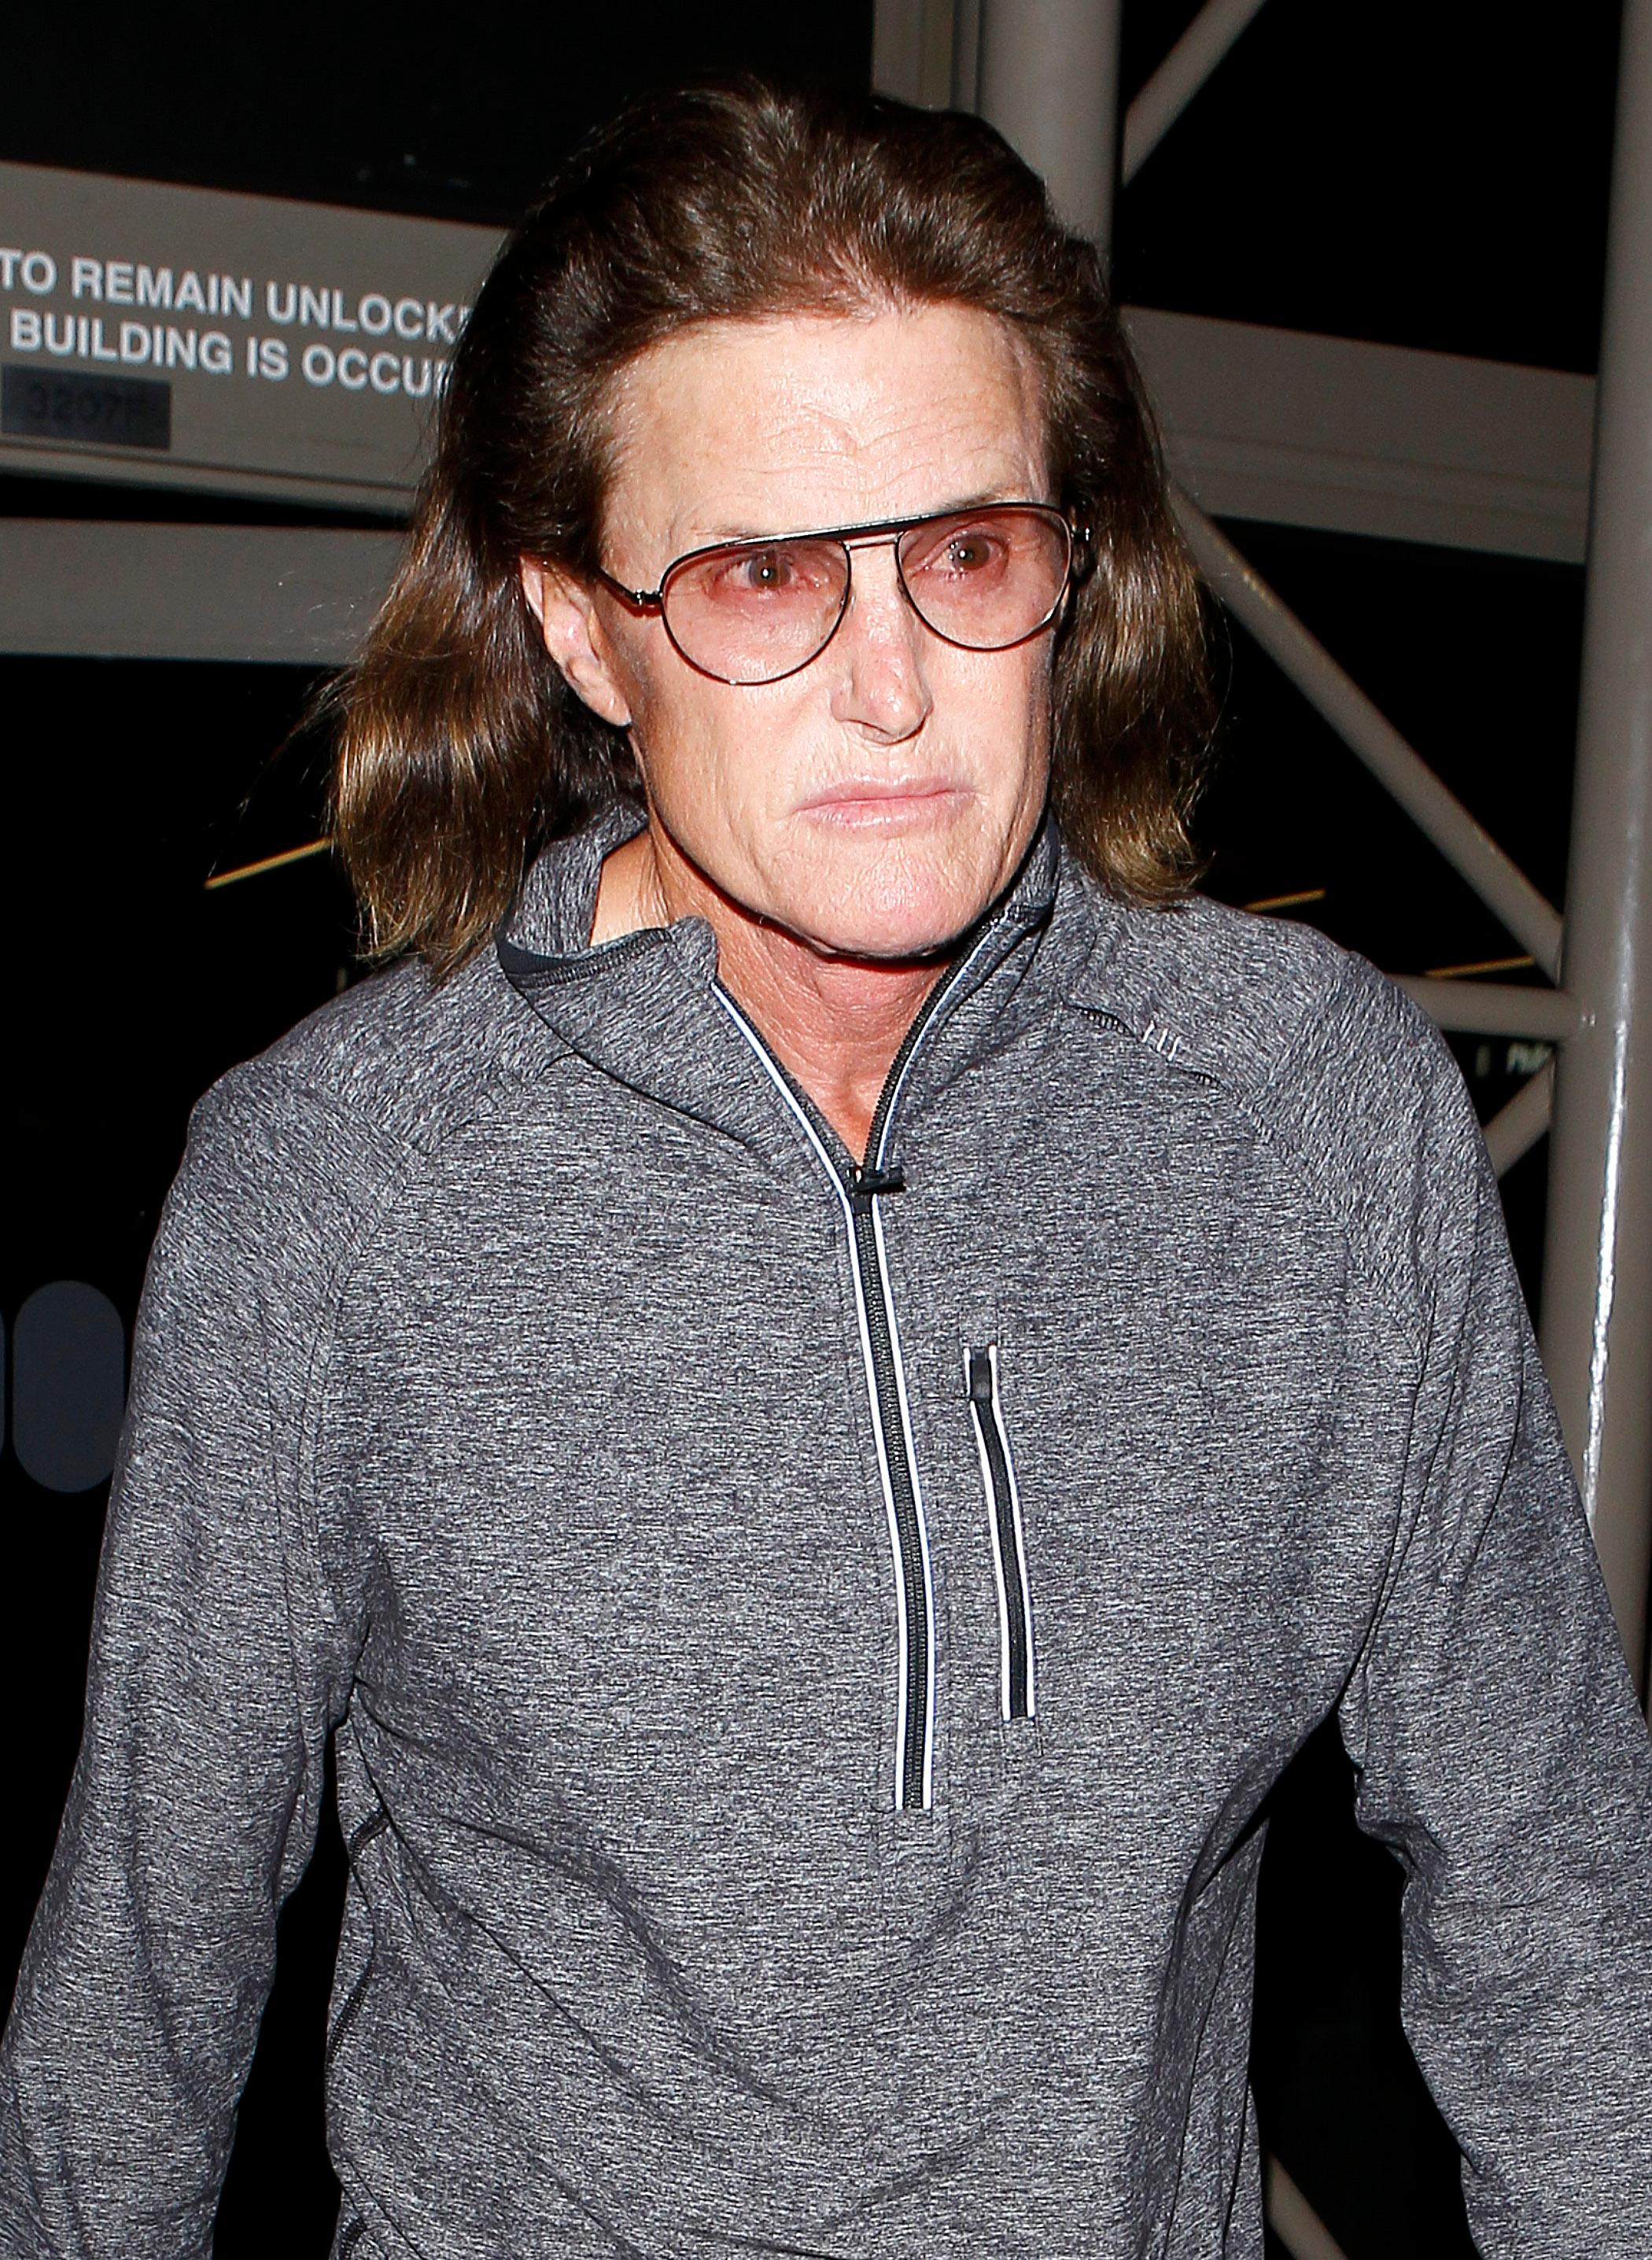 Bruce Jenner S Shocking Transformation Over The Years Is He Becoming A Woman